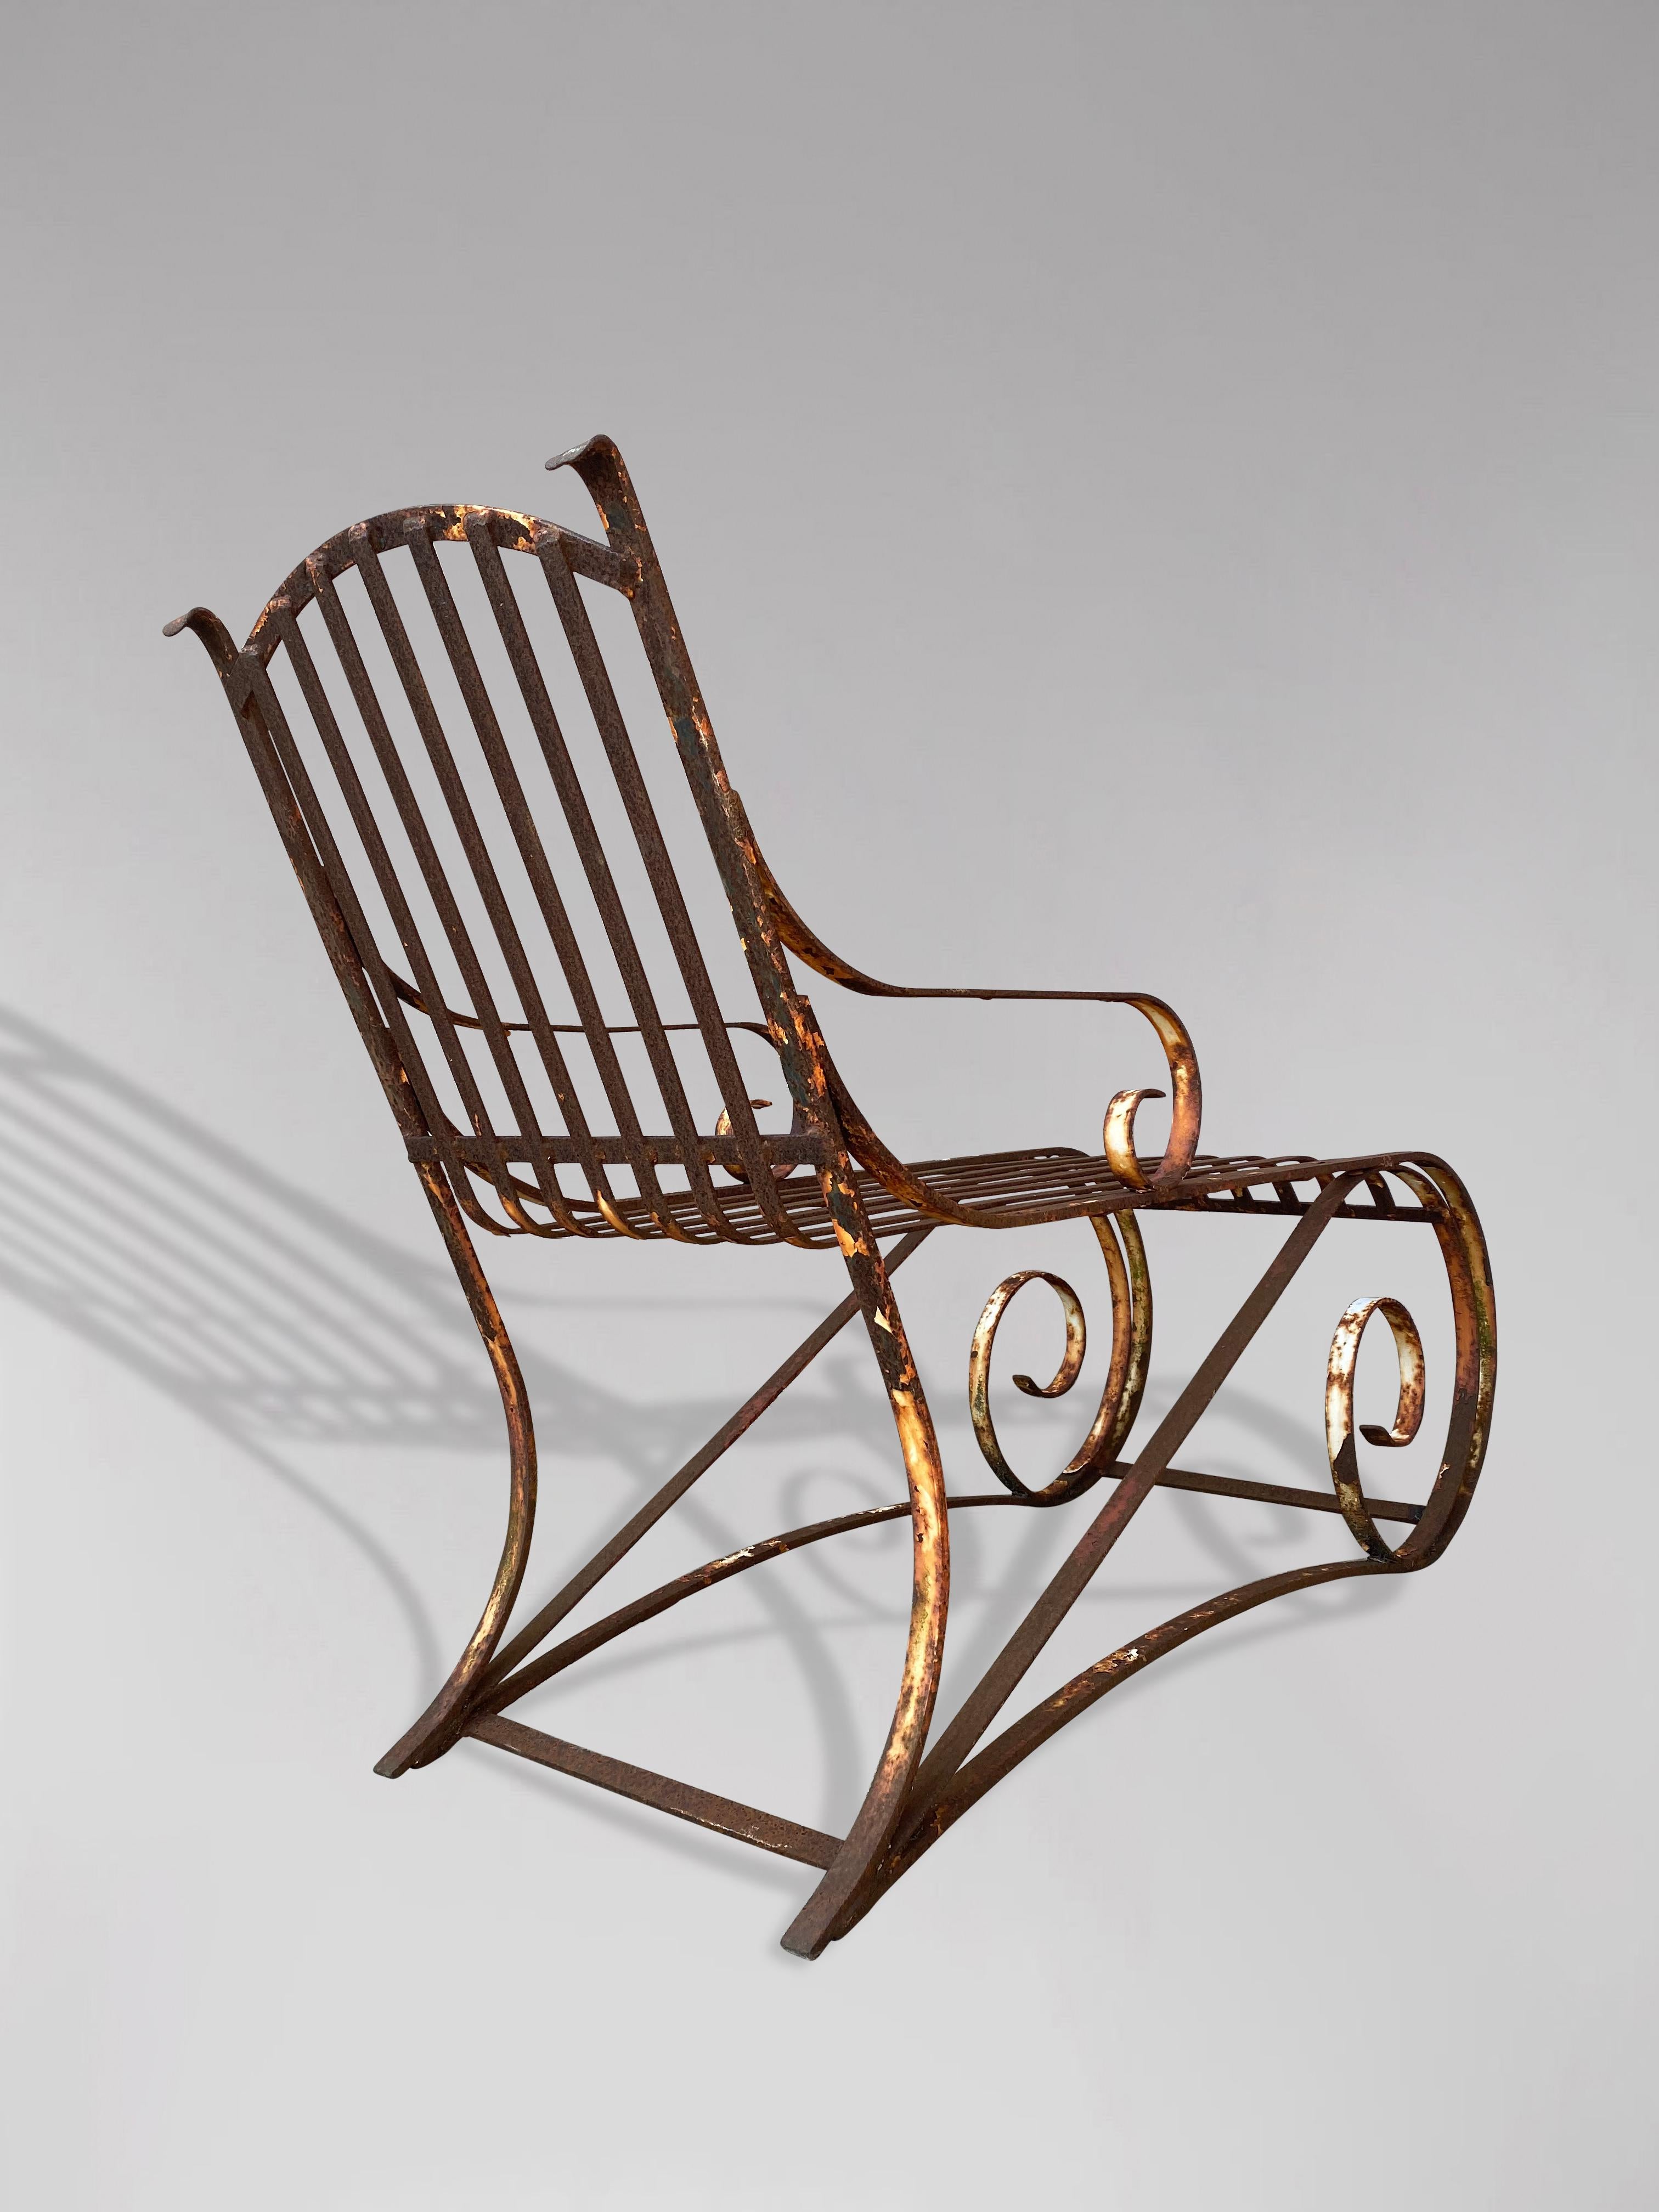 French 19th Century Wrought Iron Chaise Longue Lounger